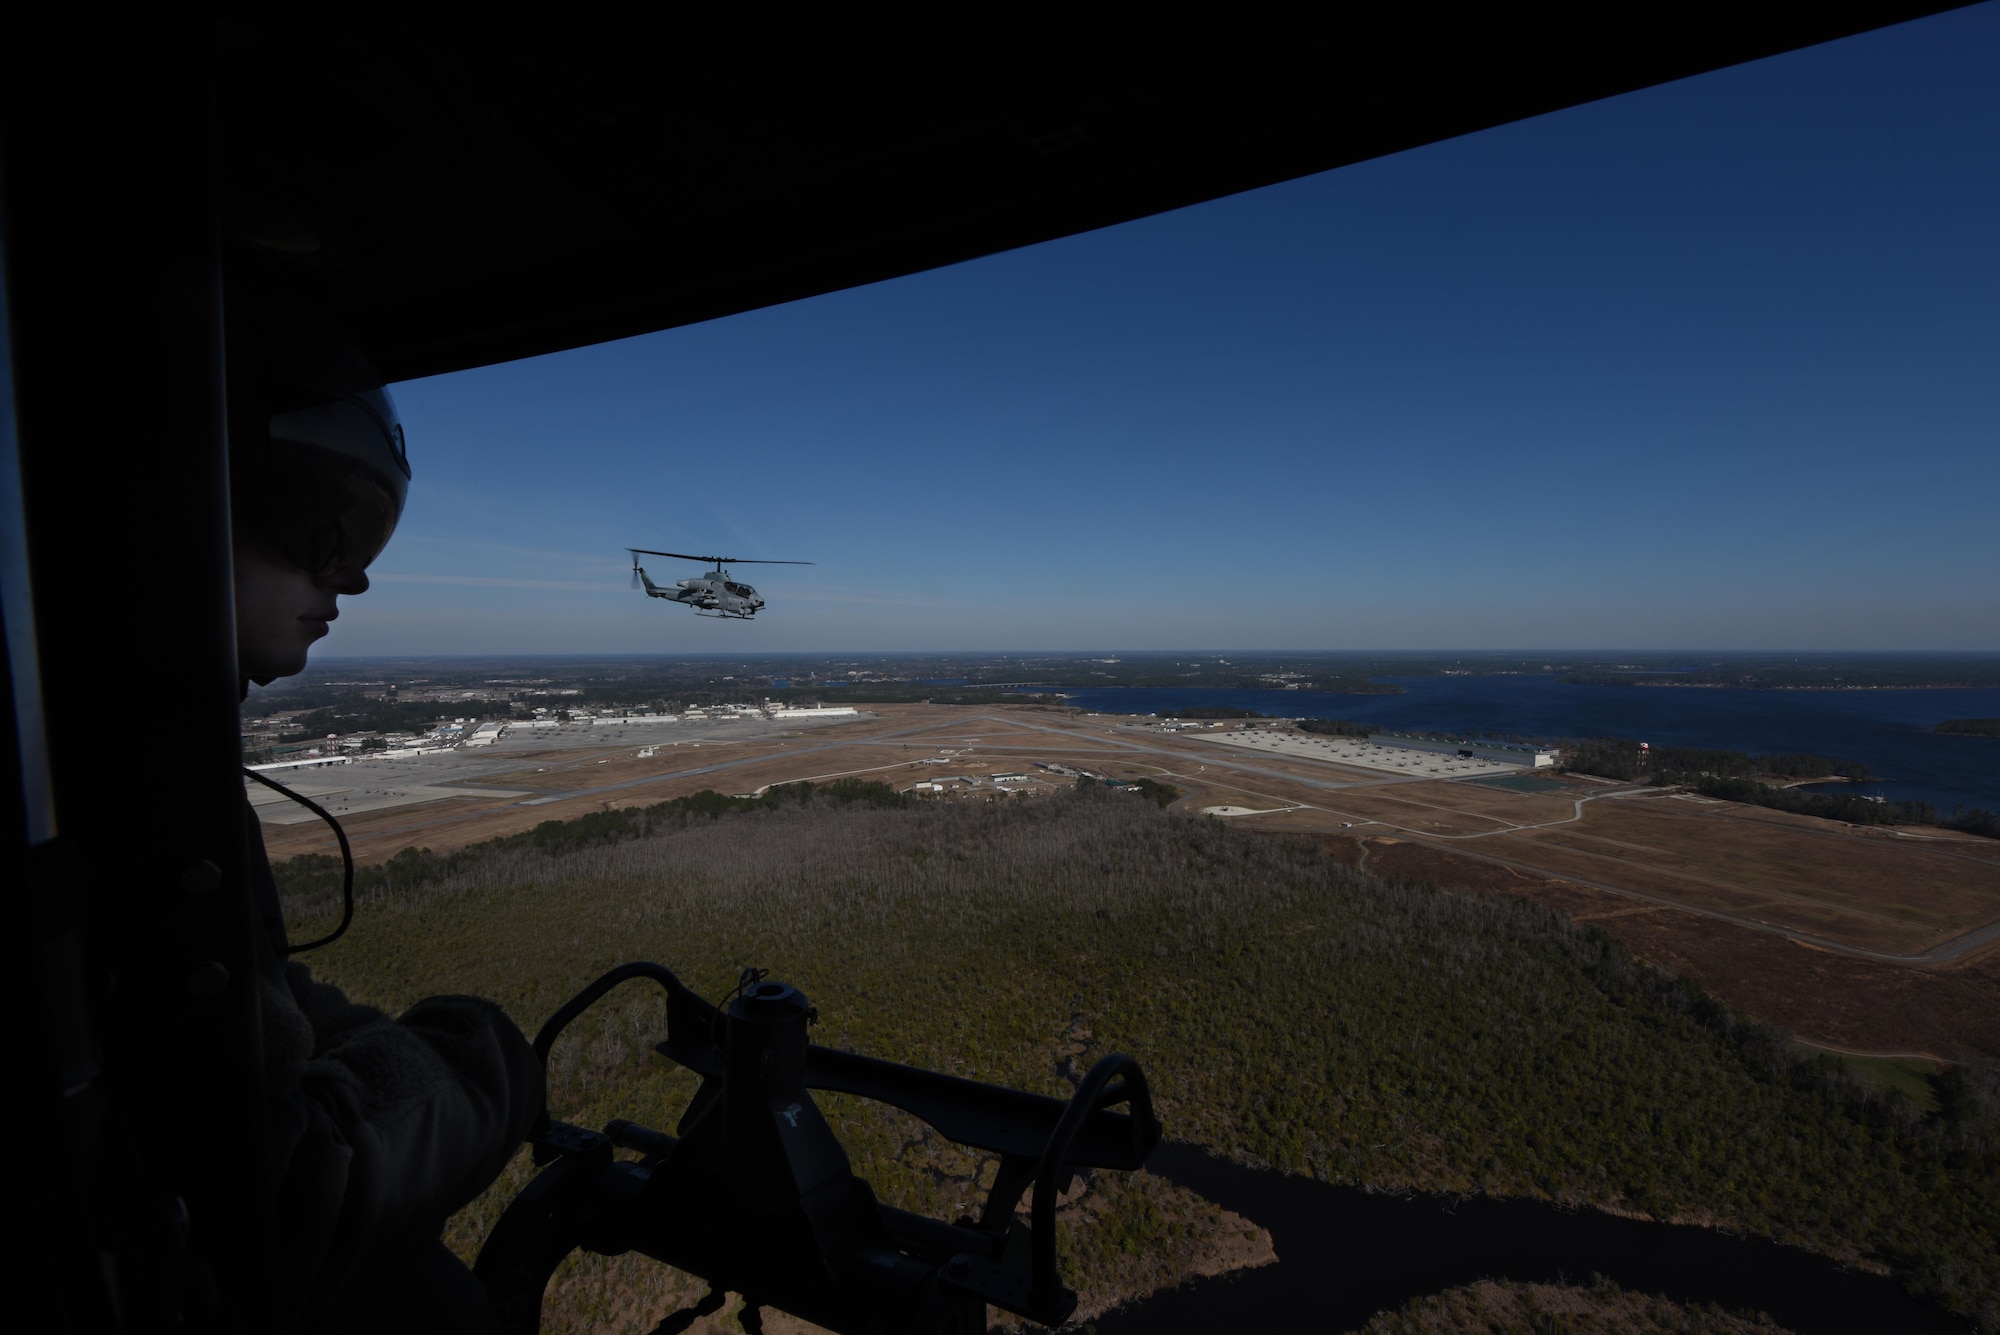 An AH-1W Super Cobra and UH-1Y Venom assigned to the Marine Light Aircraft Helicopter Squadron 269 from Marine Corps Air Station New River, in Jacksonville, North Carolina, respond to a simulated downed aircraft call during a tactical recovery of aircraft and personnel exercise, Jan. 31, 2017, in Kinston, North Carolina. The aircraft provided air support and successfully recovered the down aircrew during the exercise. (U.S. Air Force photo by Senior Airman Brittain Crolley)